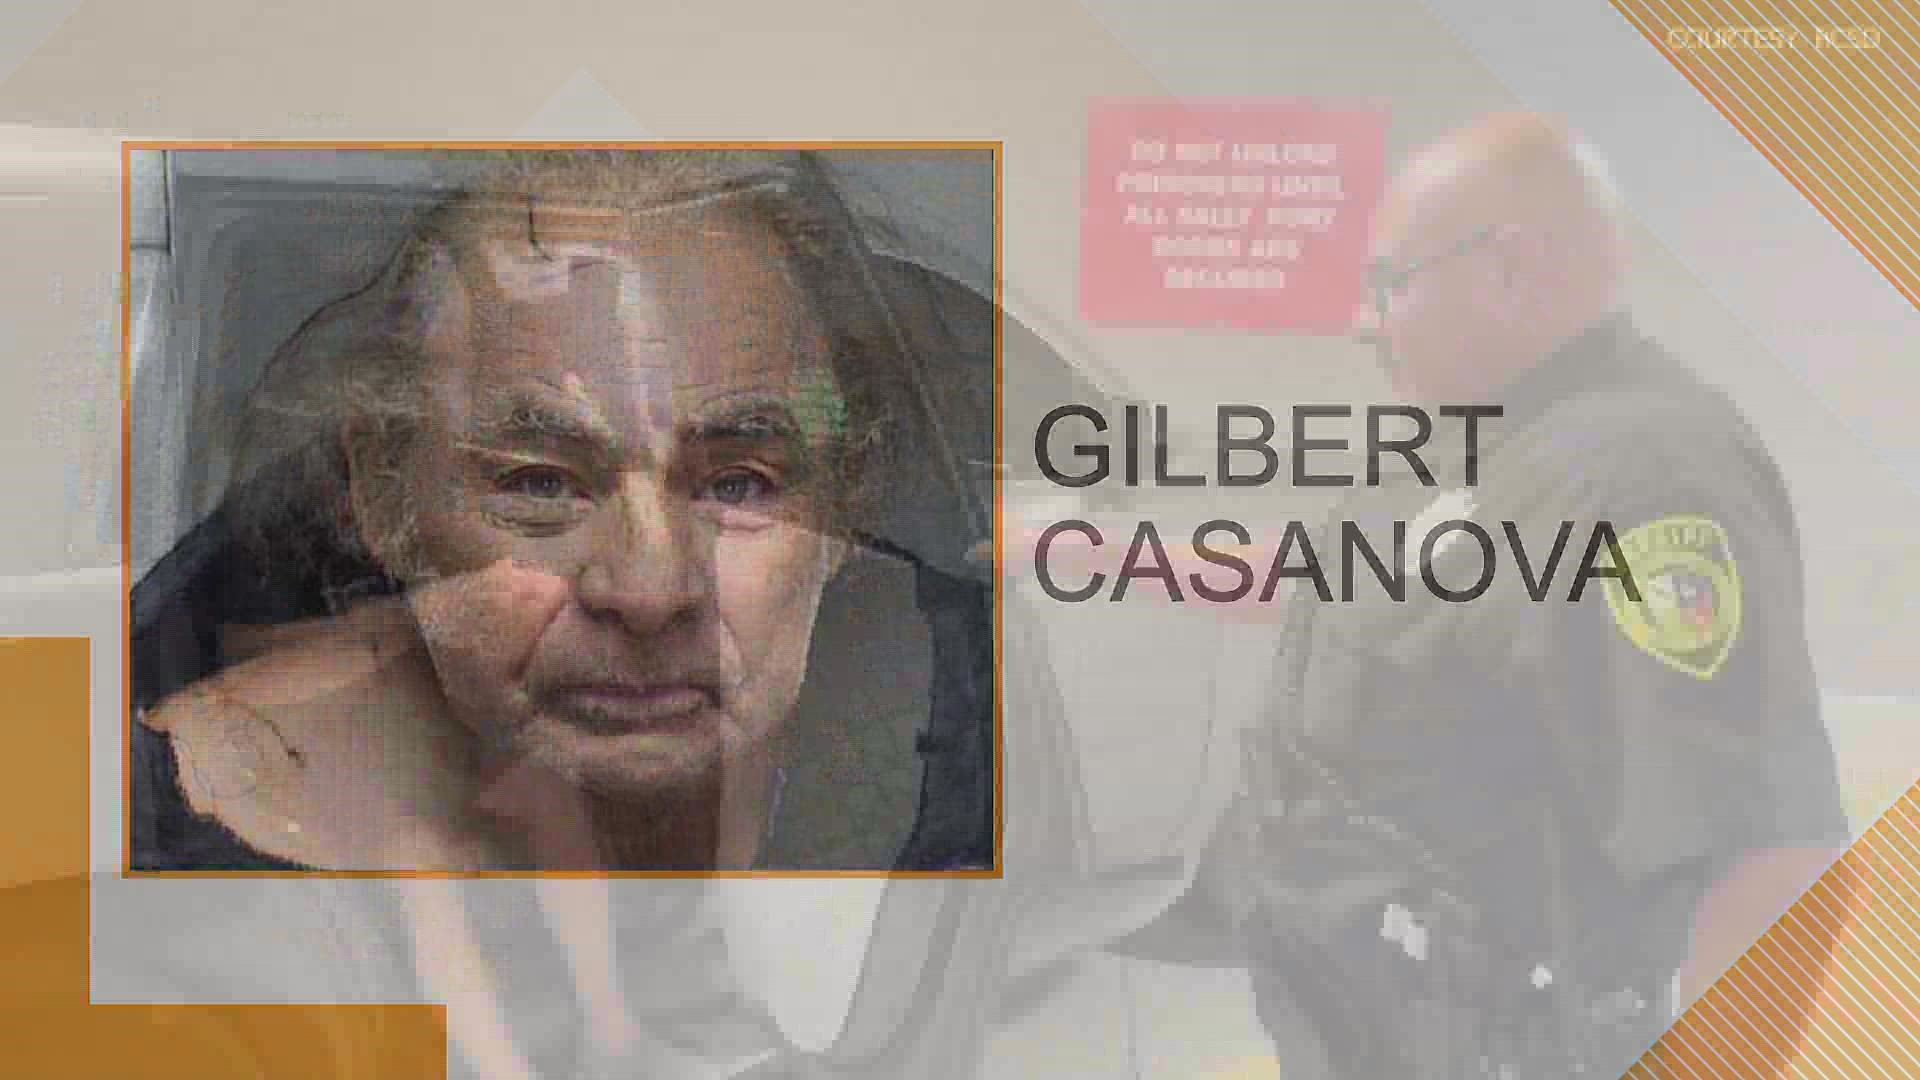 The Bexar County Sheriff's Office is asking anyone who has information about 76-year-old Gilbert Casanova to give them a call.